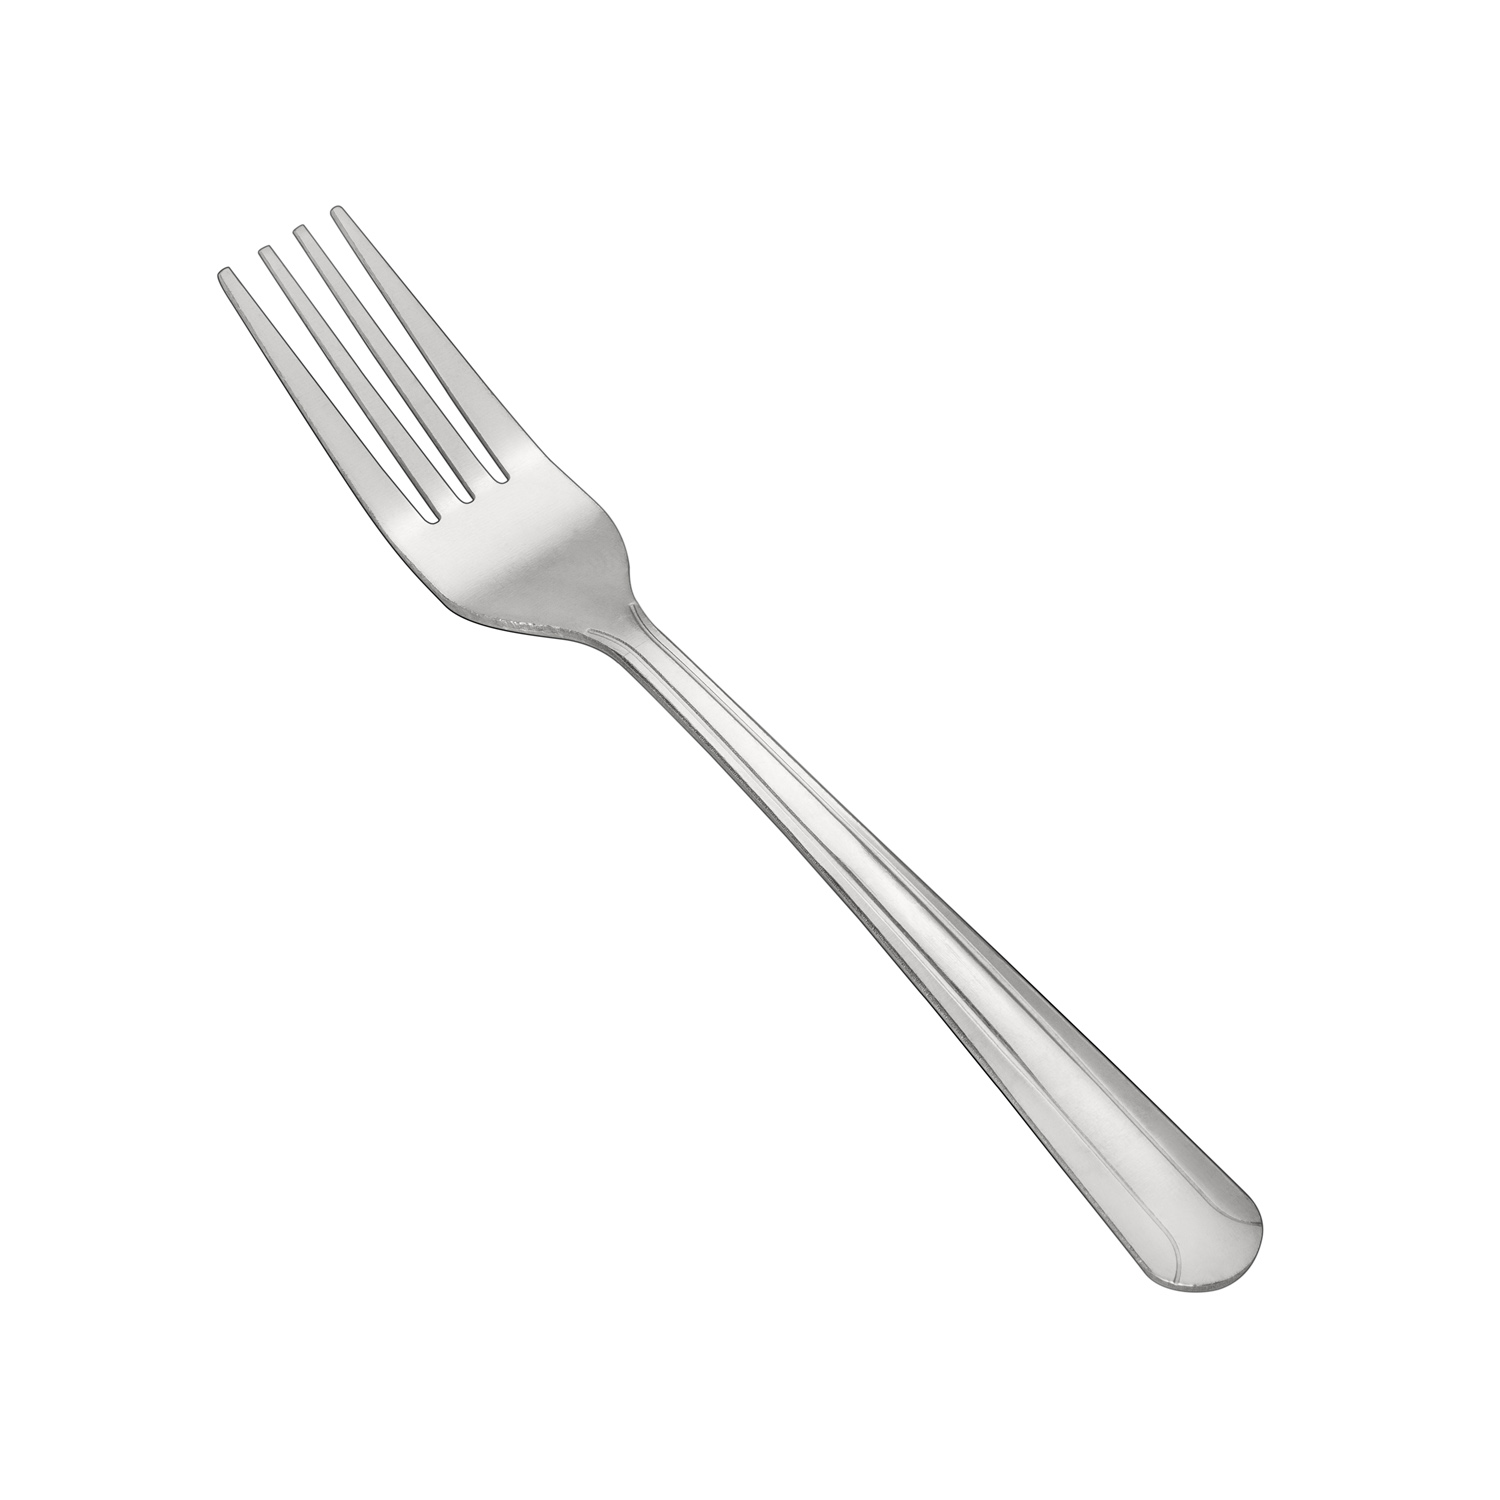 CAC China 2001-05 Dominion Dinner Fork, Heavyweight 18/0, 7 1/8"